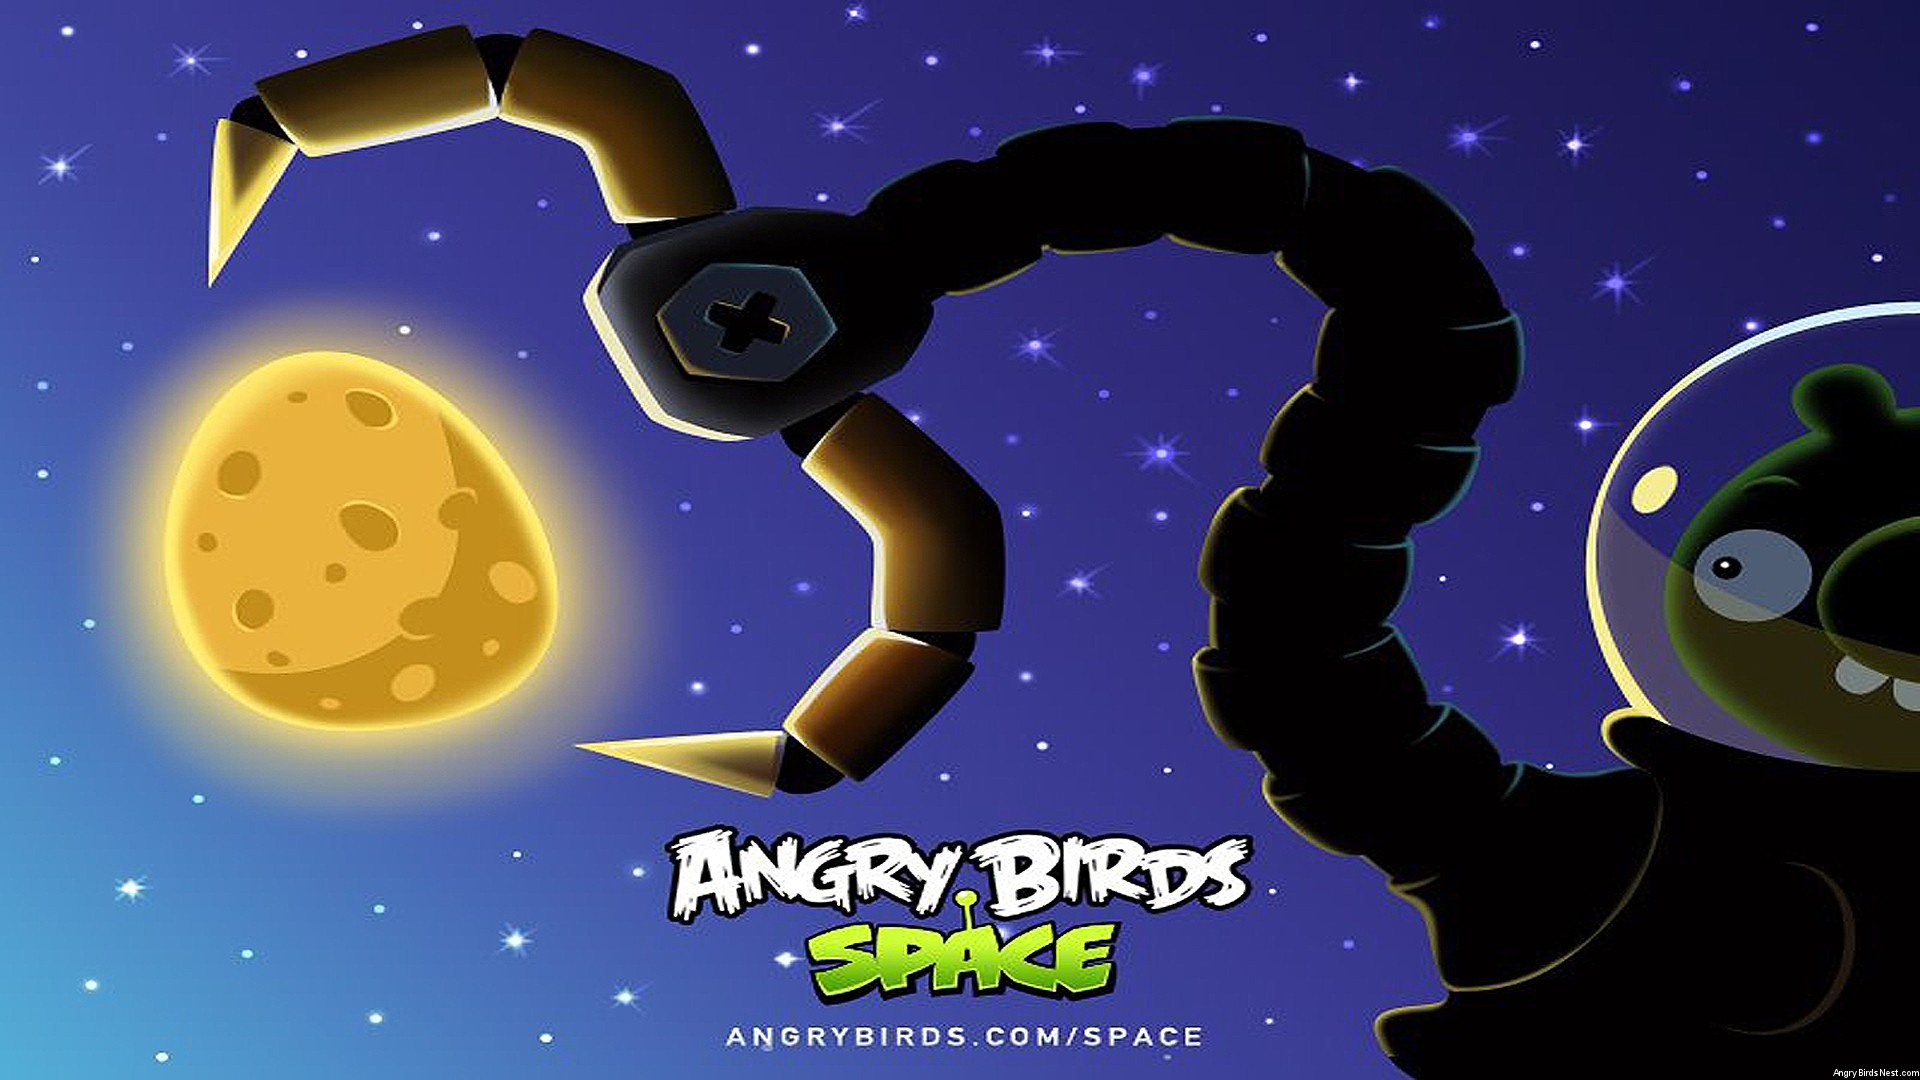 Angry Birds Spiel wallpapers #24 - 1920x1080